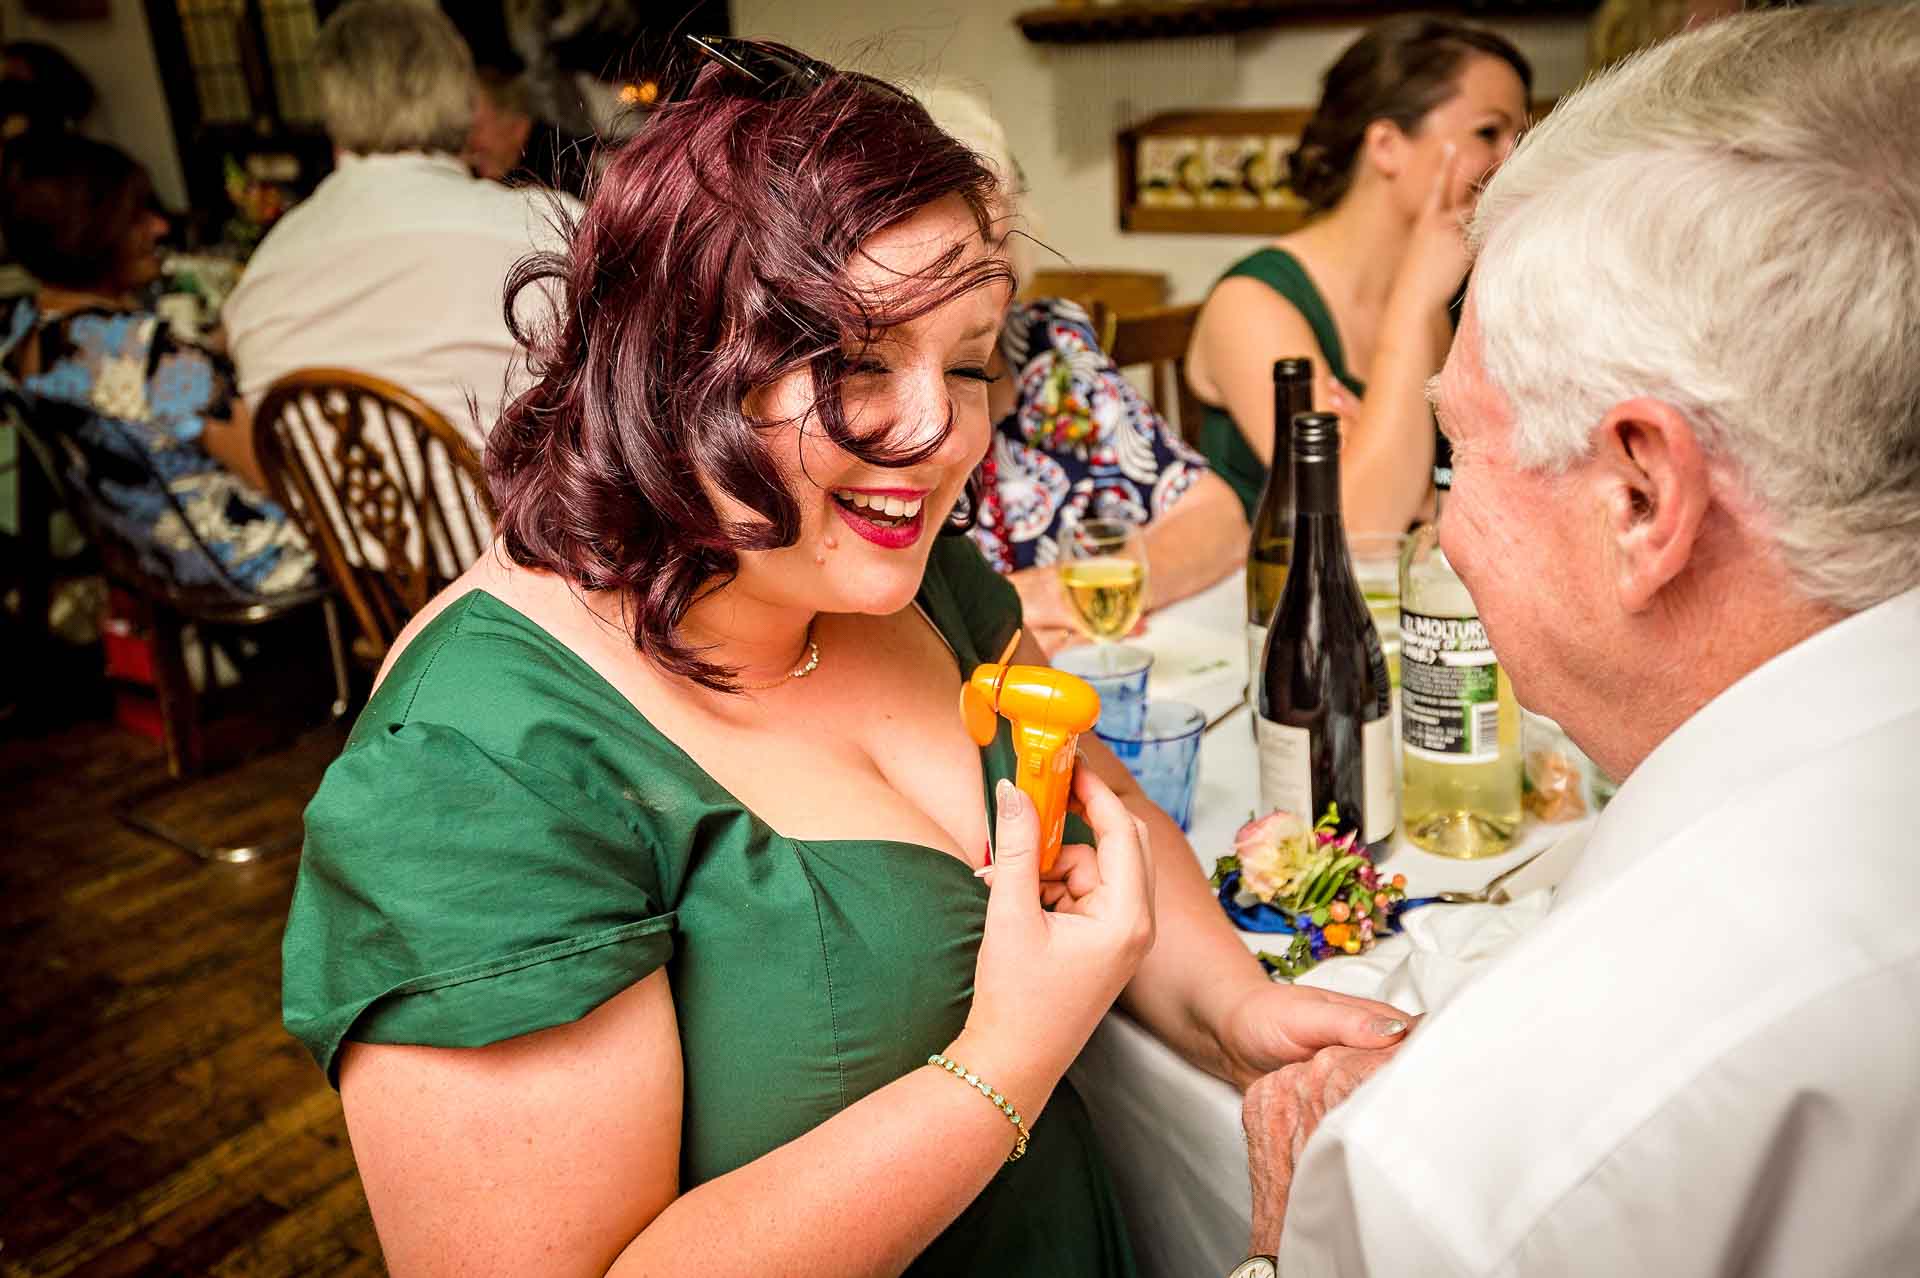 Bridesmaid at wedding meal in restaurant holding fan and laughing on a hot day